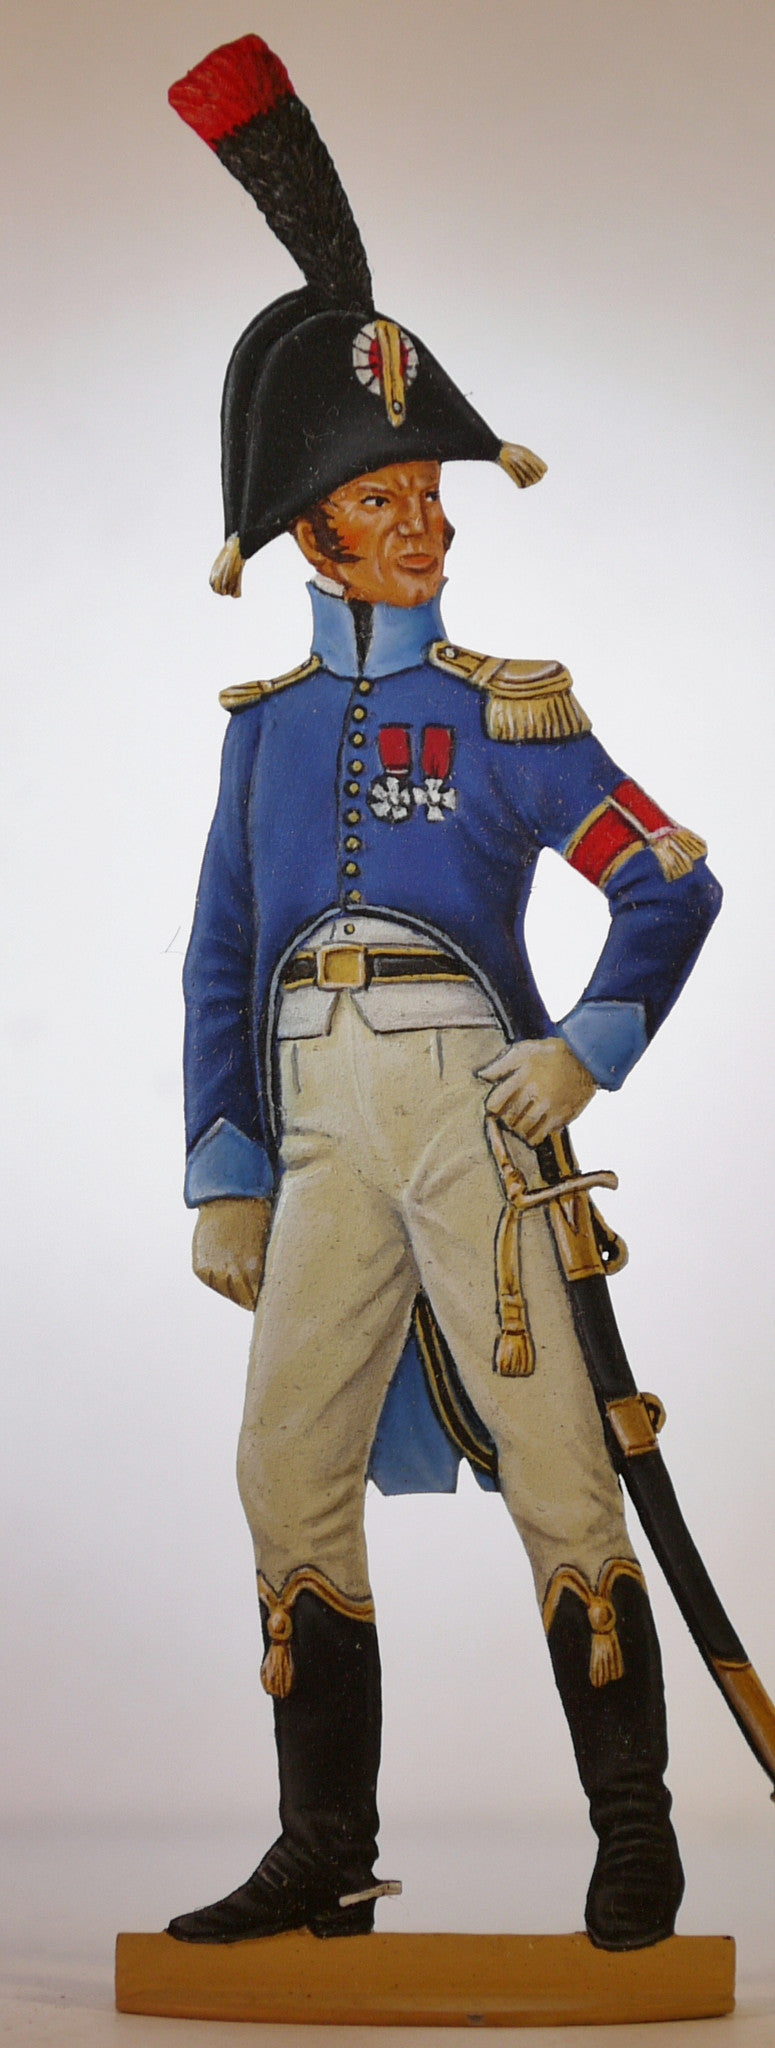 A.d.C. of Division General, regulation dress. - Glorious Empires-Historical Miniatures  